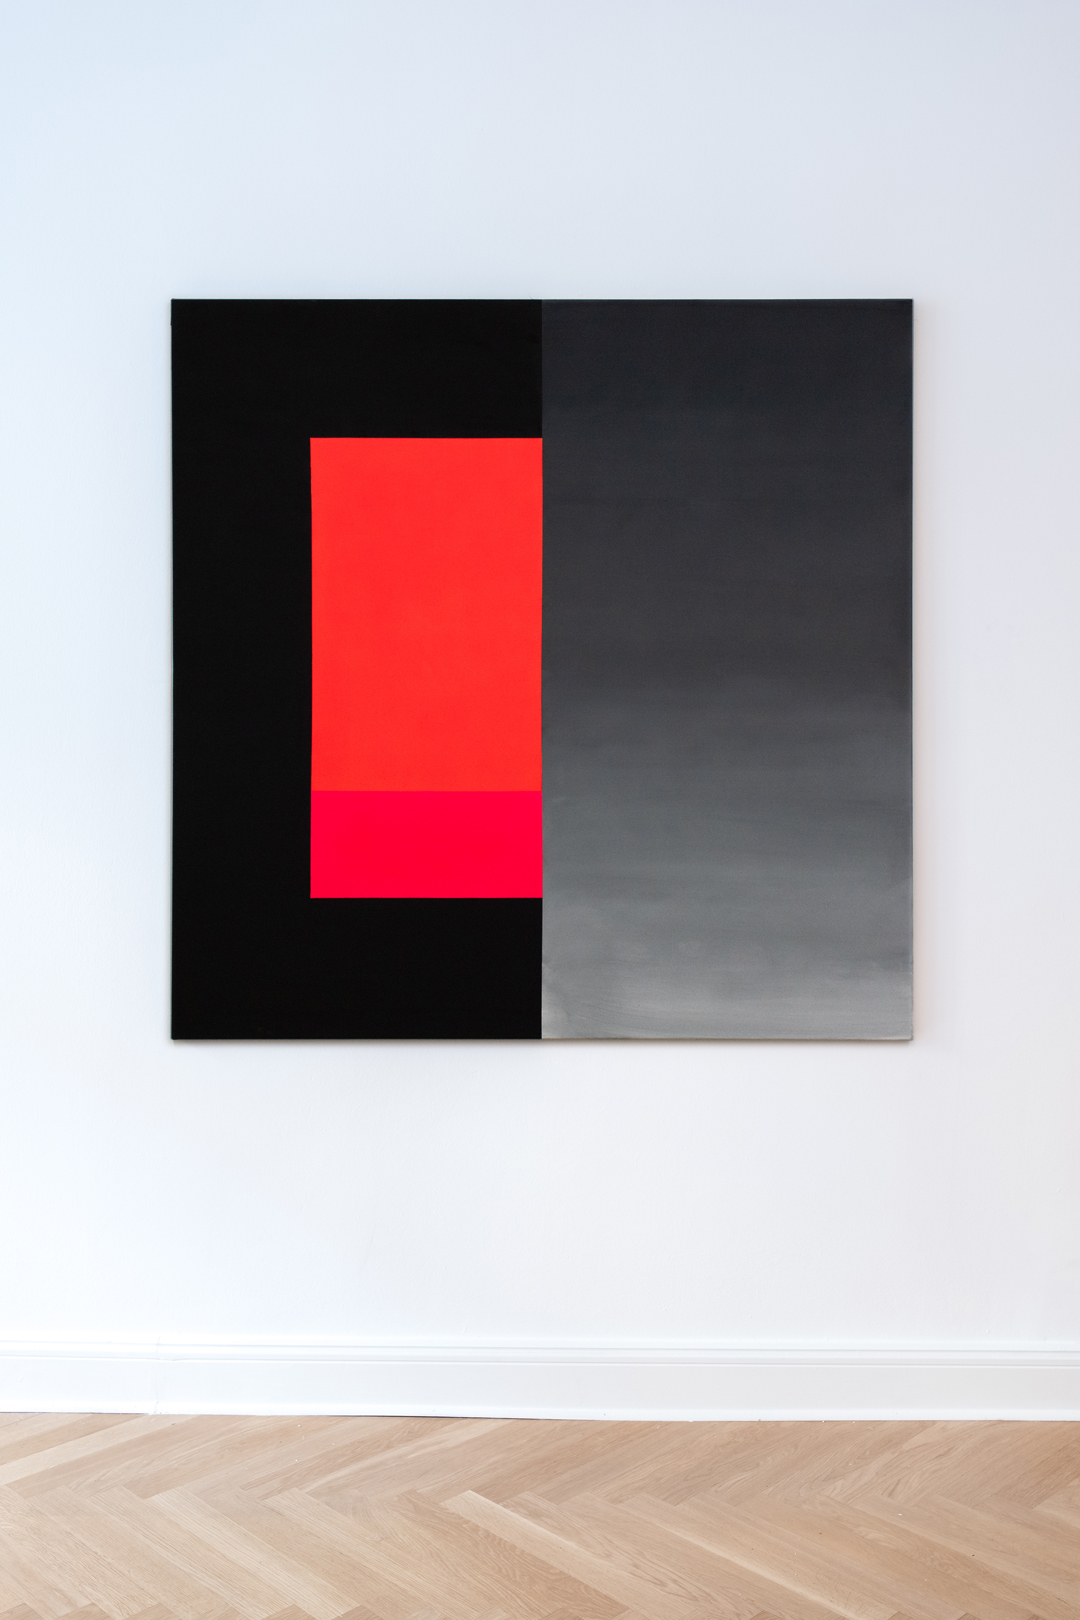 bernhard holaschke /// who is afraid of red and magenta (black and white) /// 2020